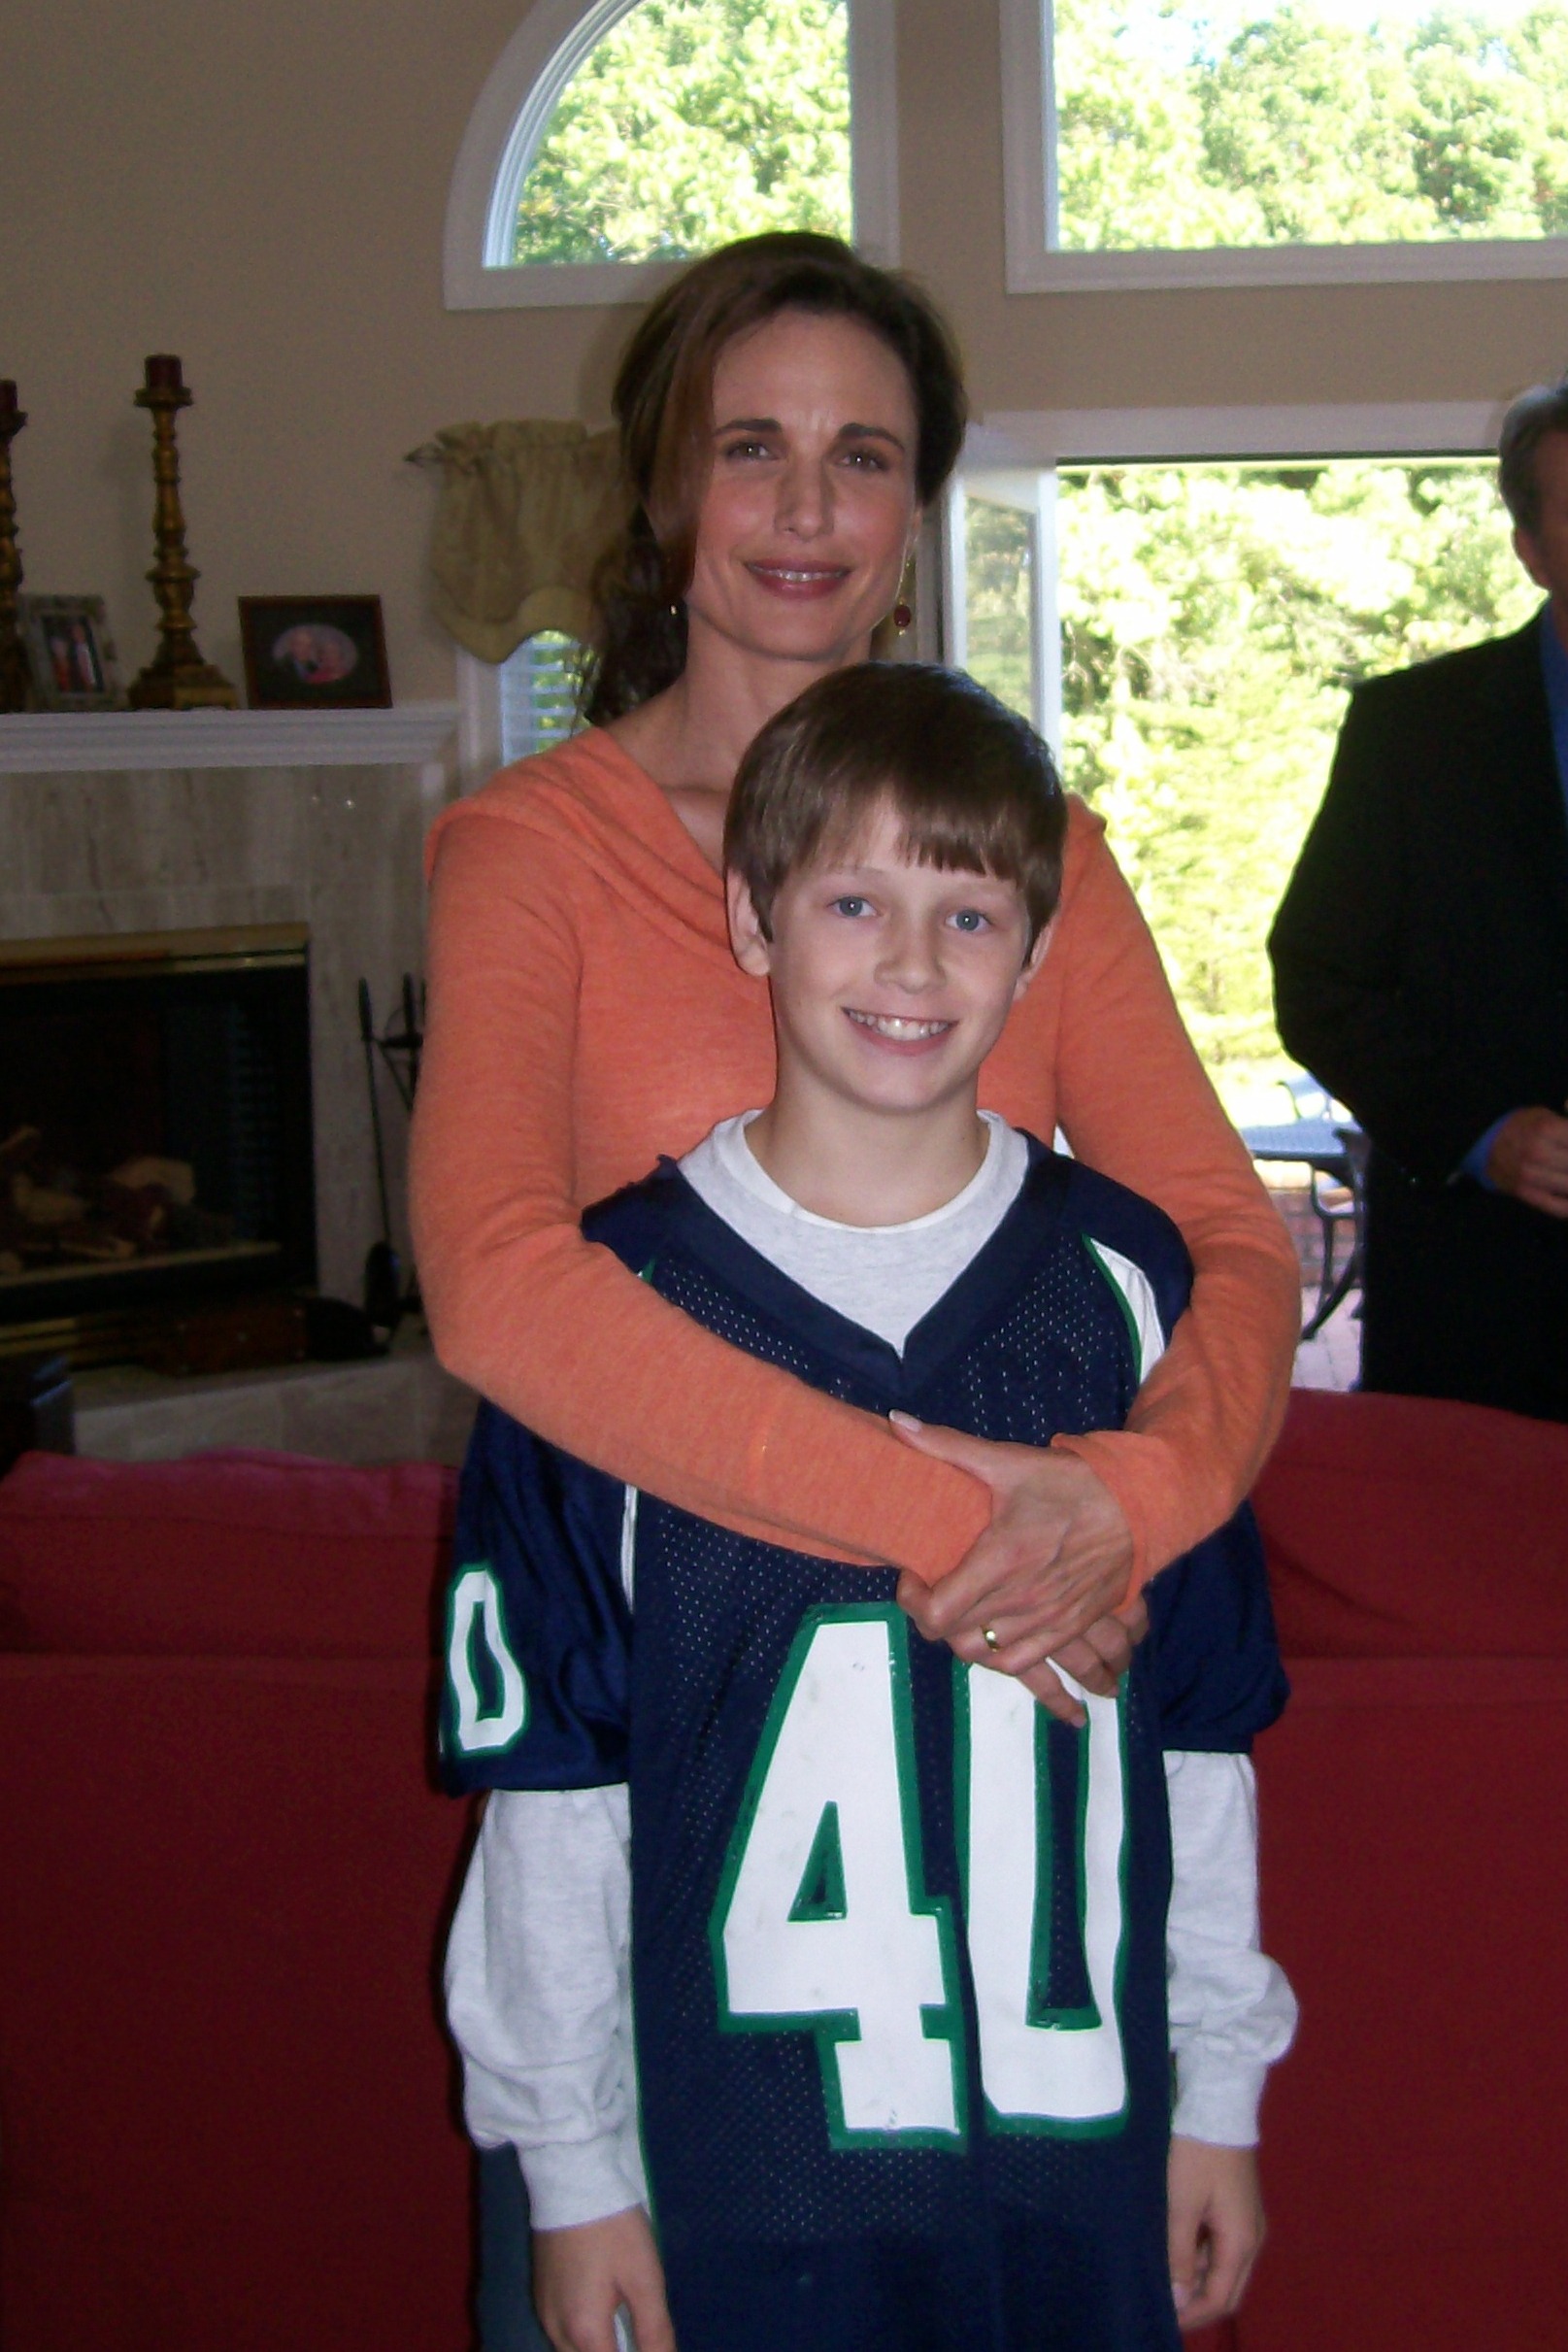 Kenny and Andie MacDowell after their mother and son scenes in The 5th Quarter.